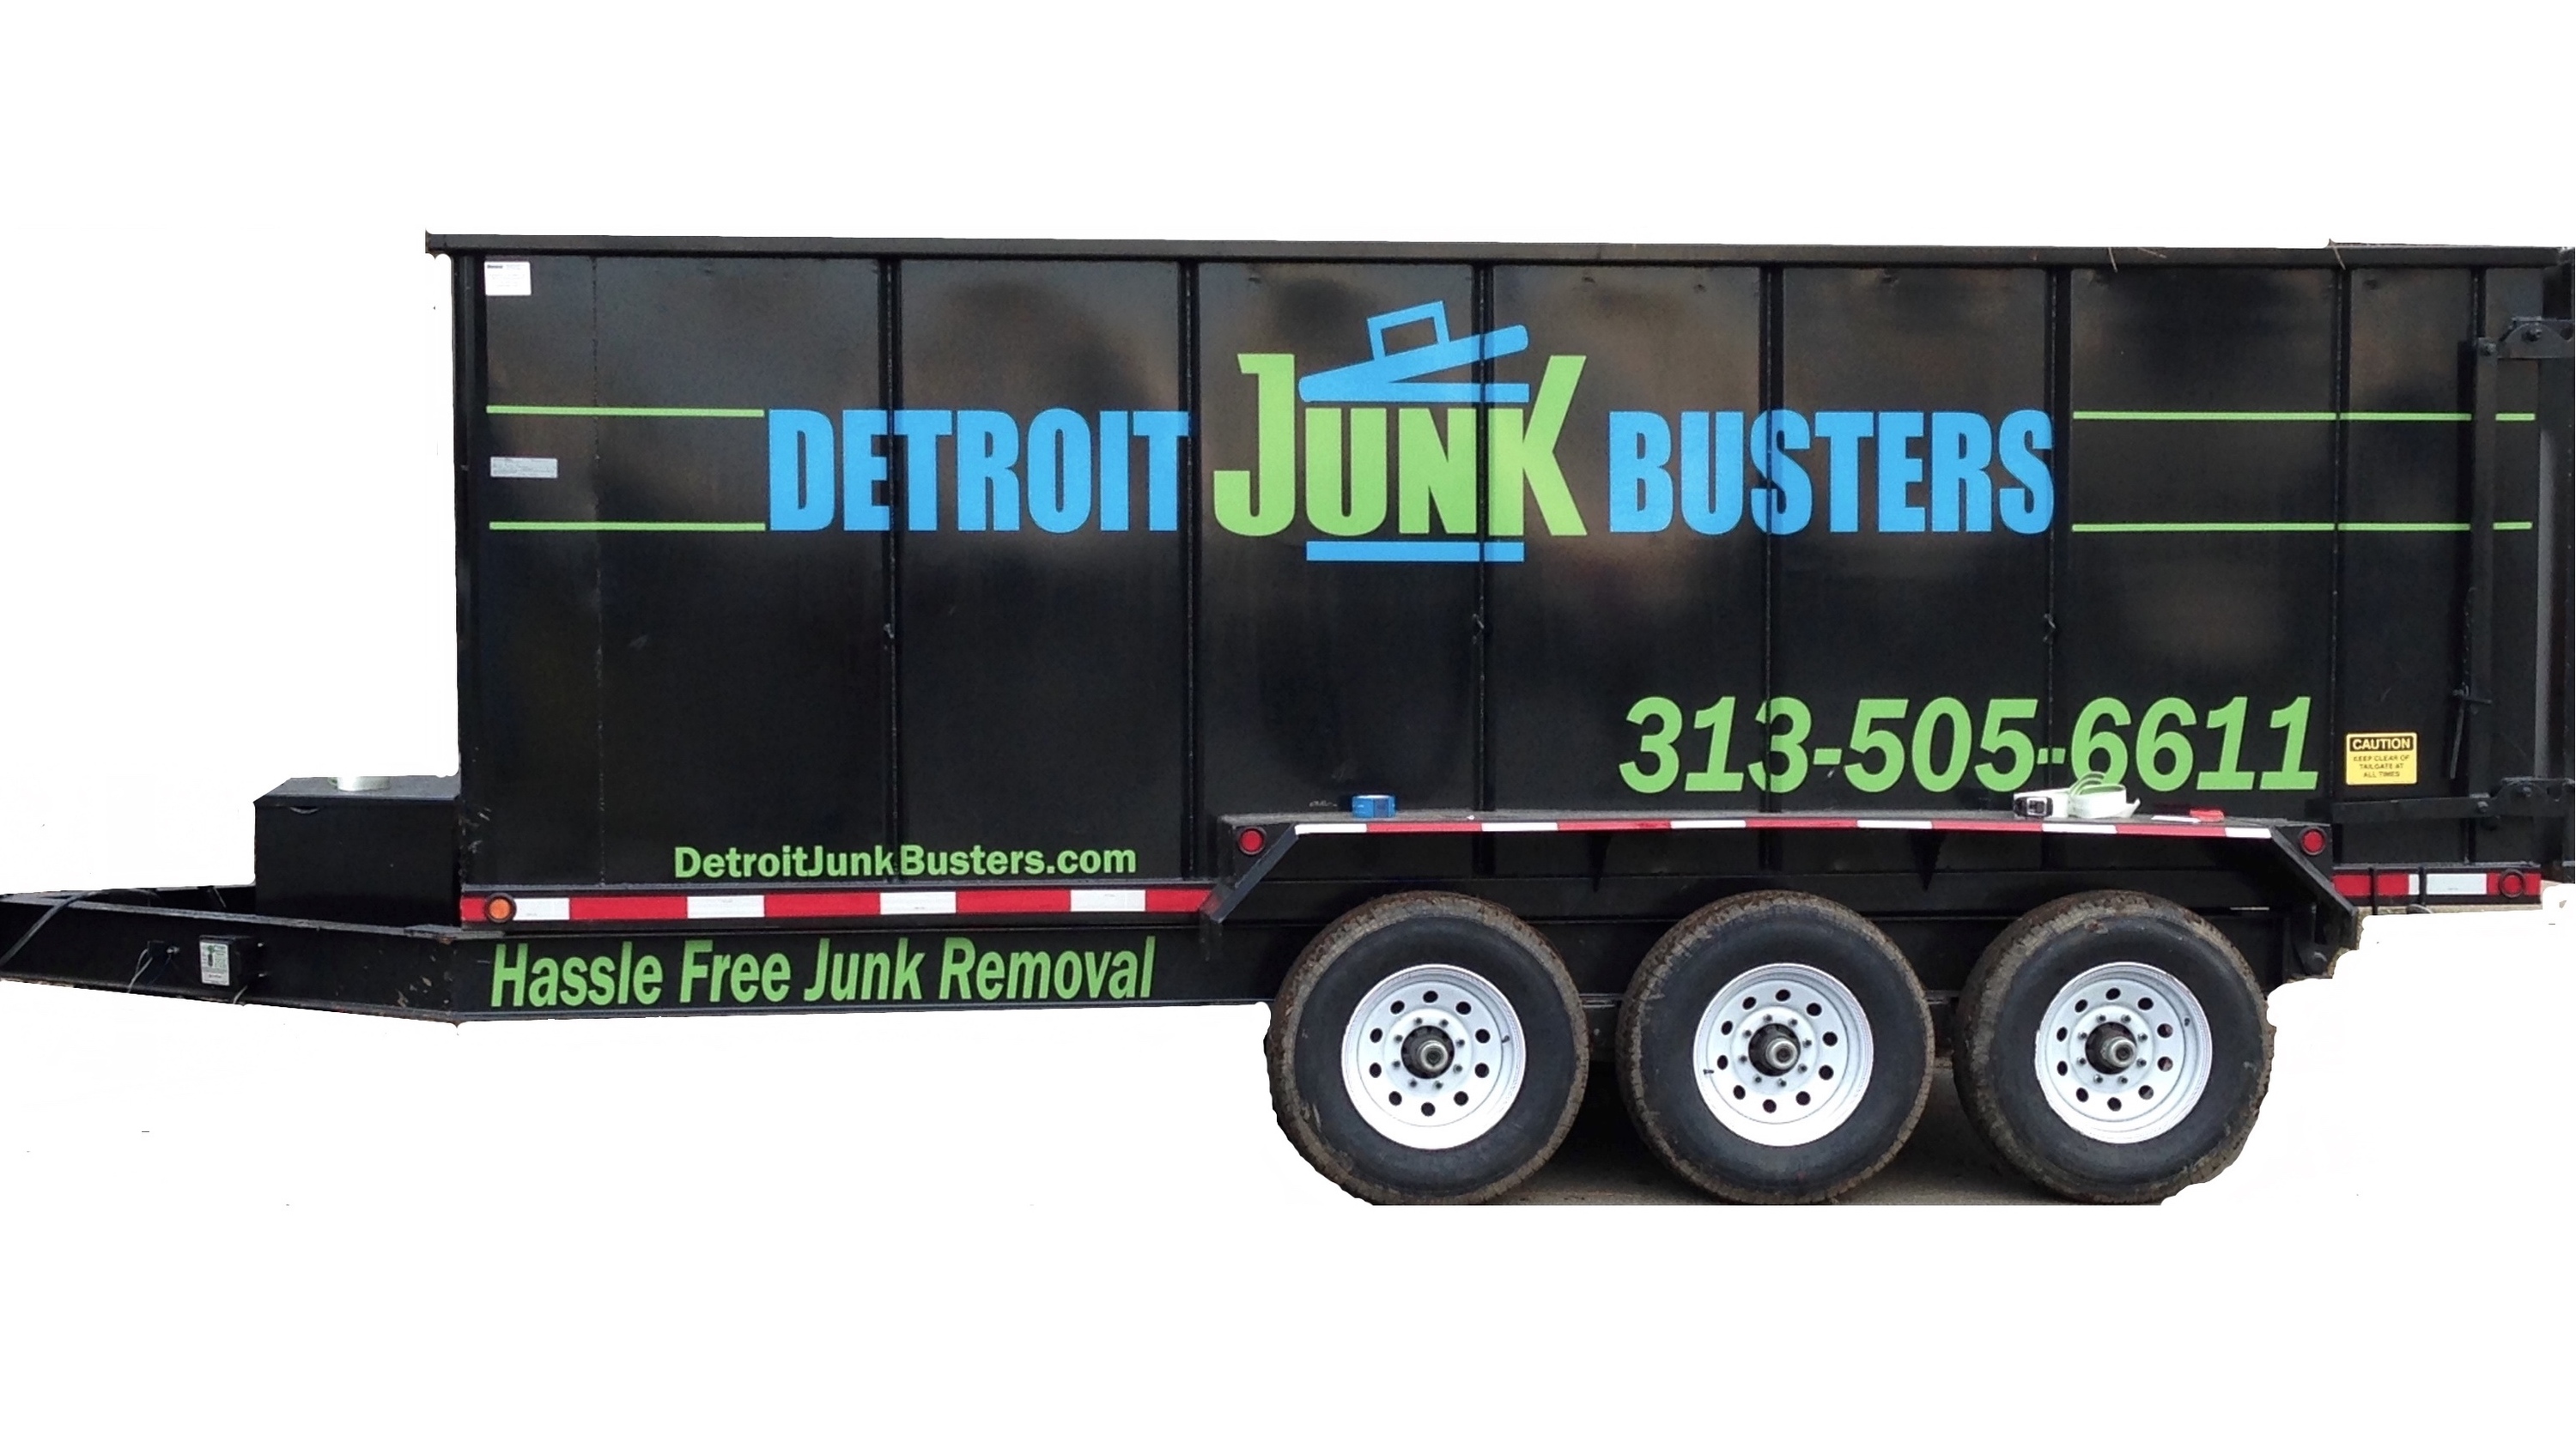 Detroit Junk removal and 20 yd dumpster rentals, rubber wheeled